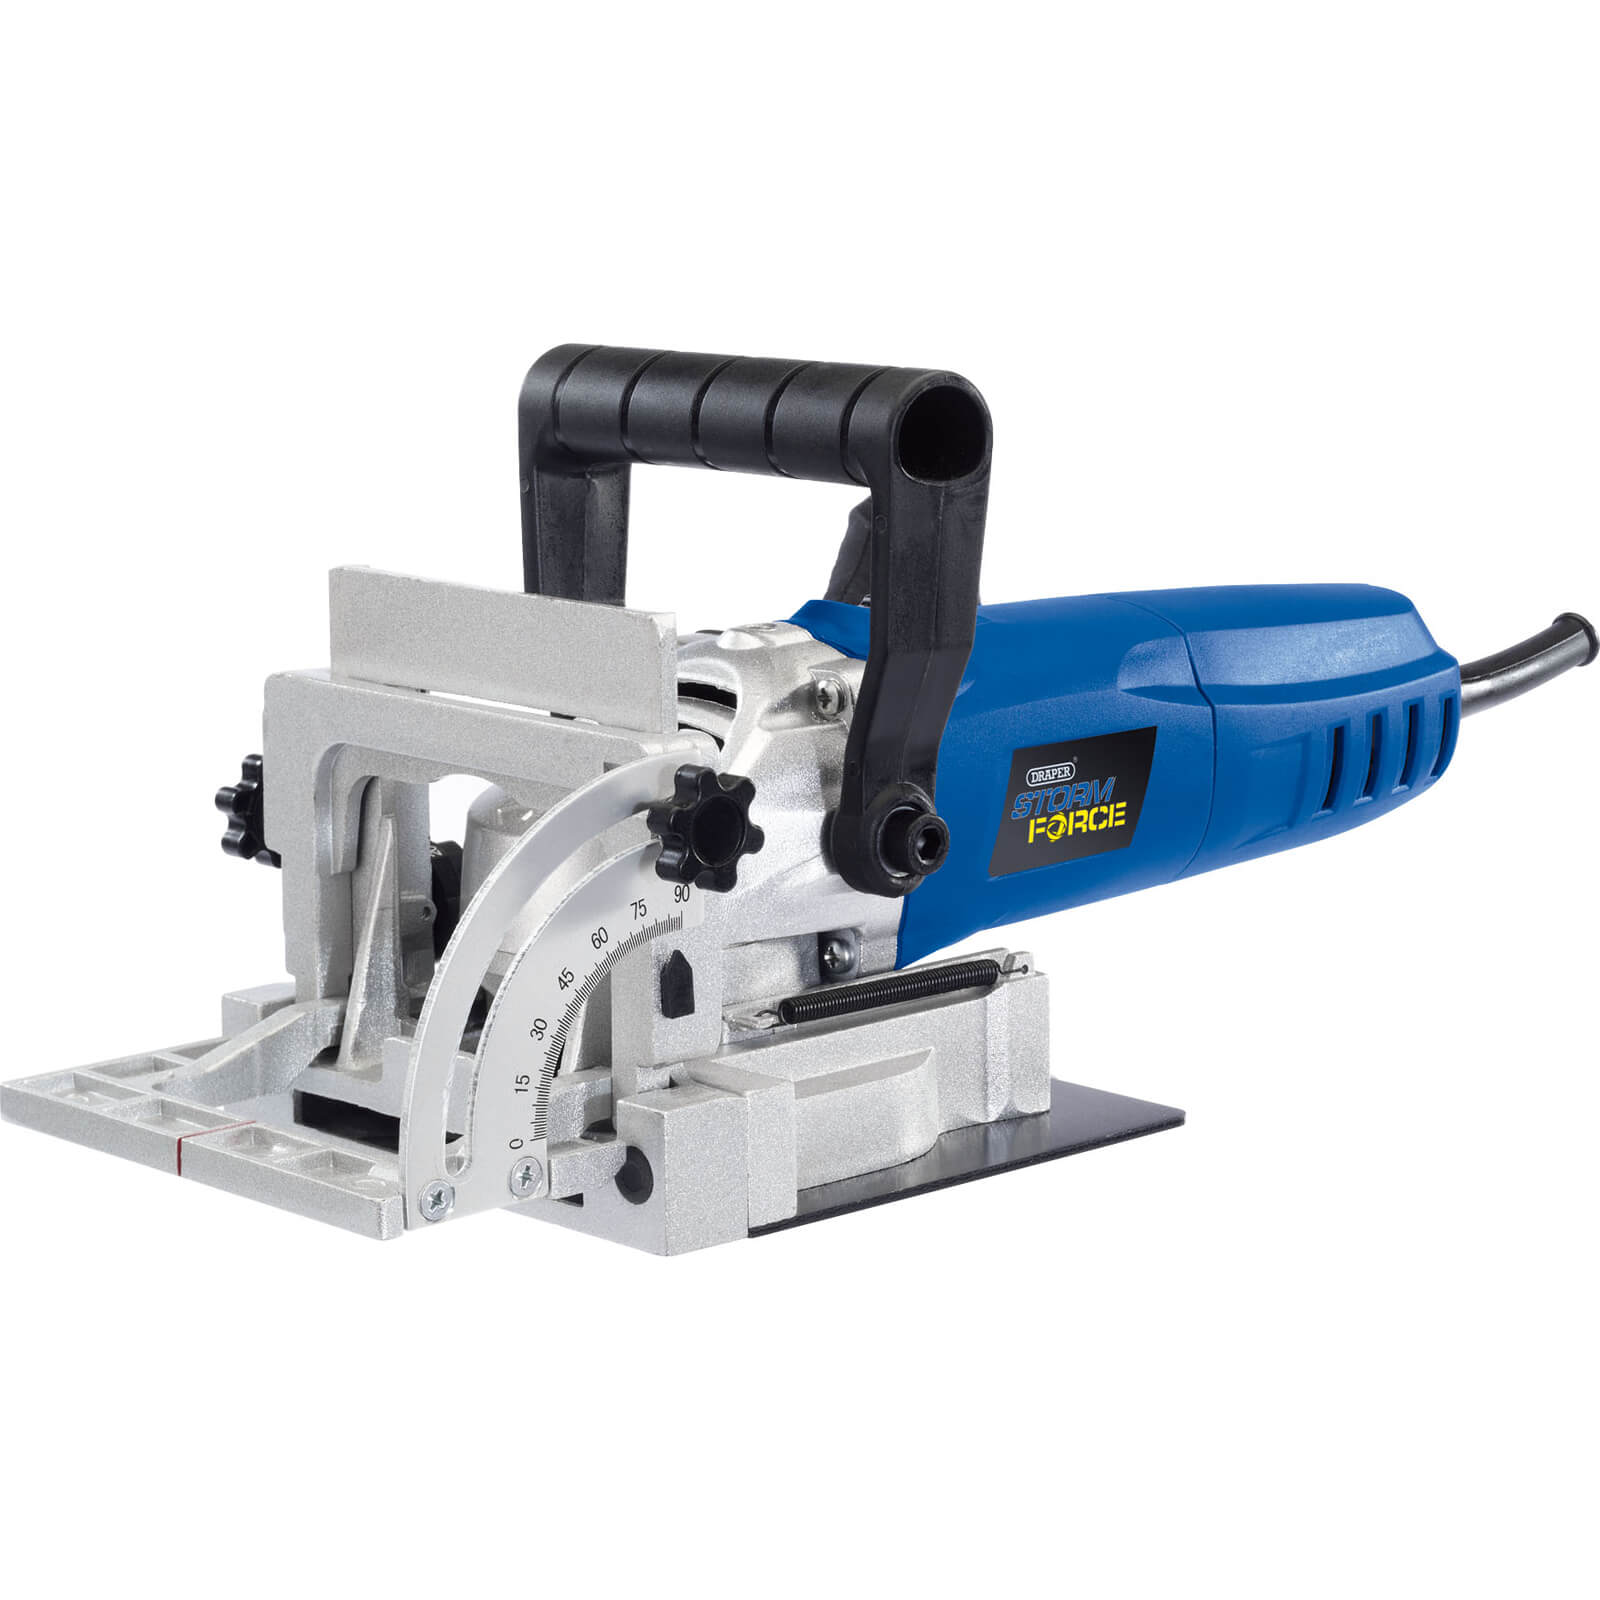 product image of Draper PT8100SF Storm Force Biscuit Jointer 240v